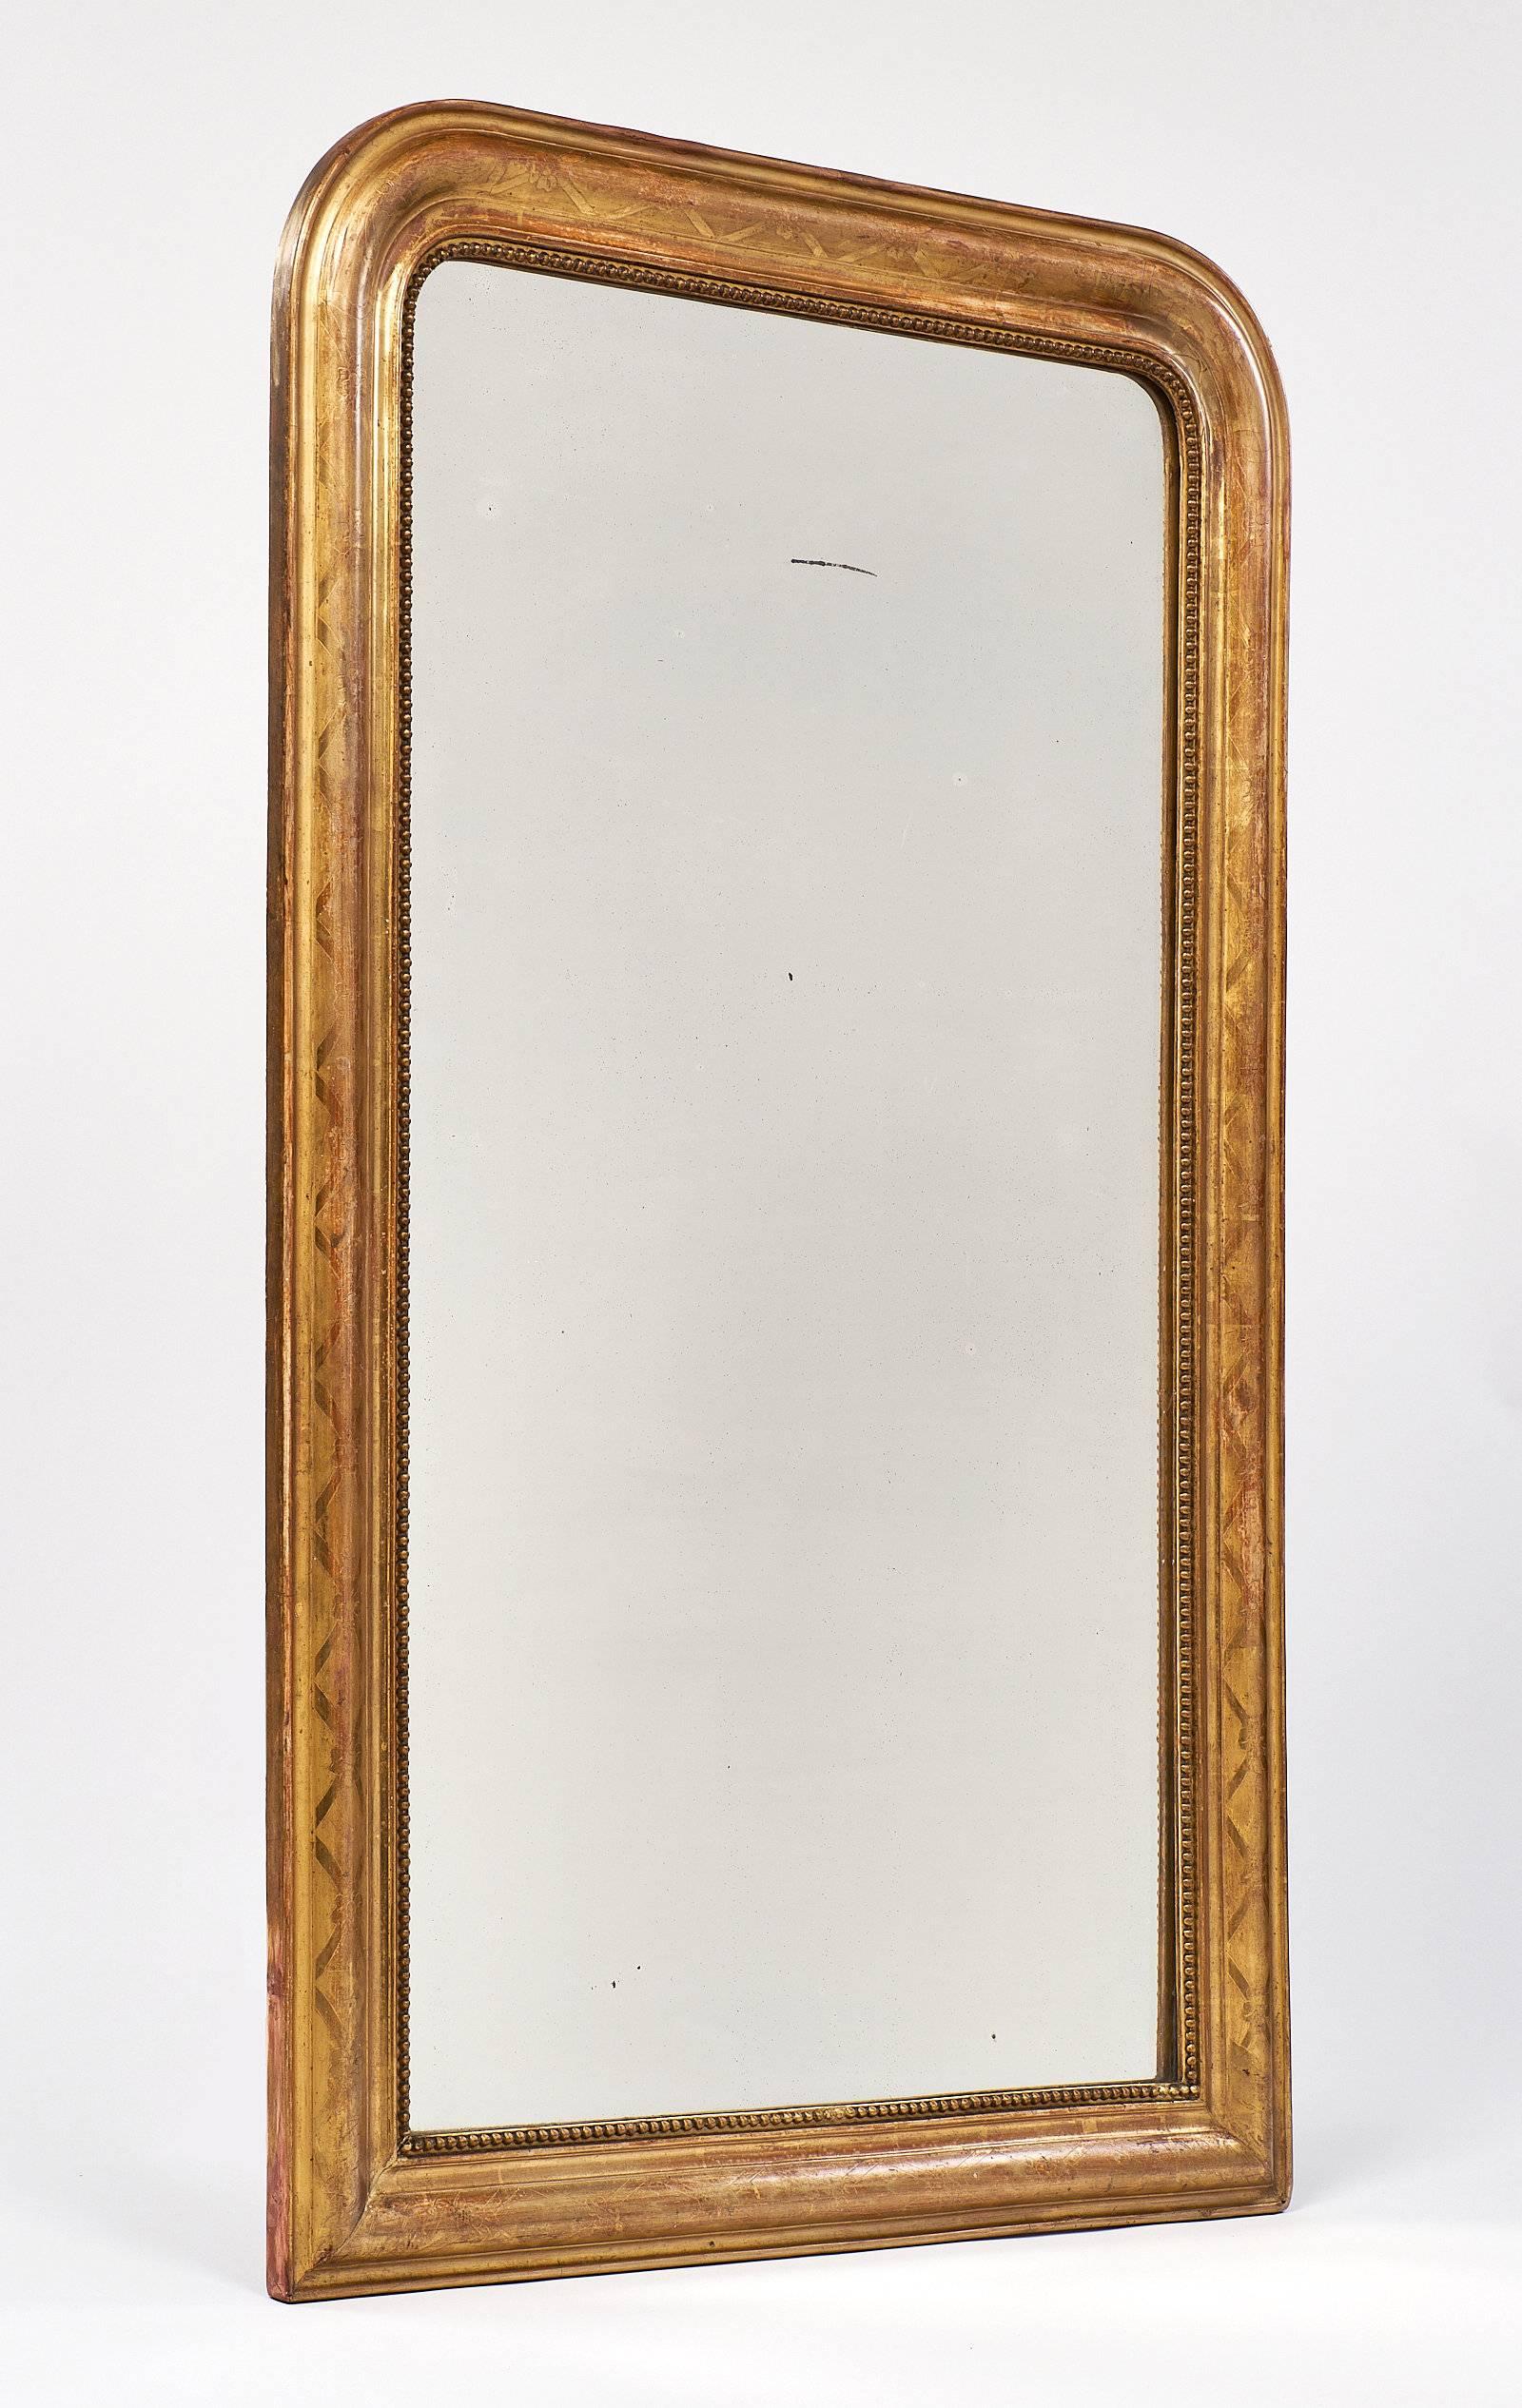 Wonderful Louis Philippe mirror with the iconic rounded upper corners. This piece has the original mercury glass mirror in fantastic condition. The frame is gold leafed with a beautiful floral motif. The frame also has beading surrounding the mirror